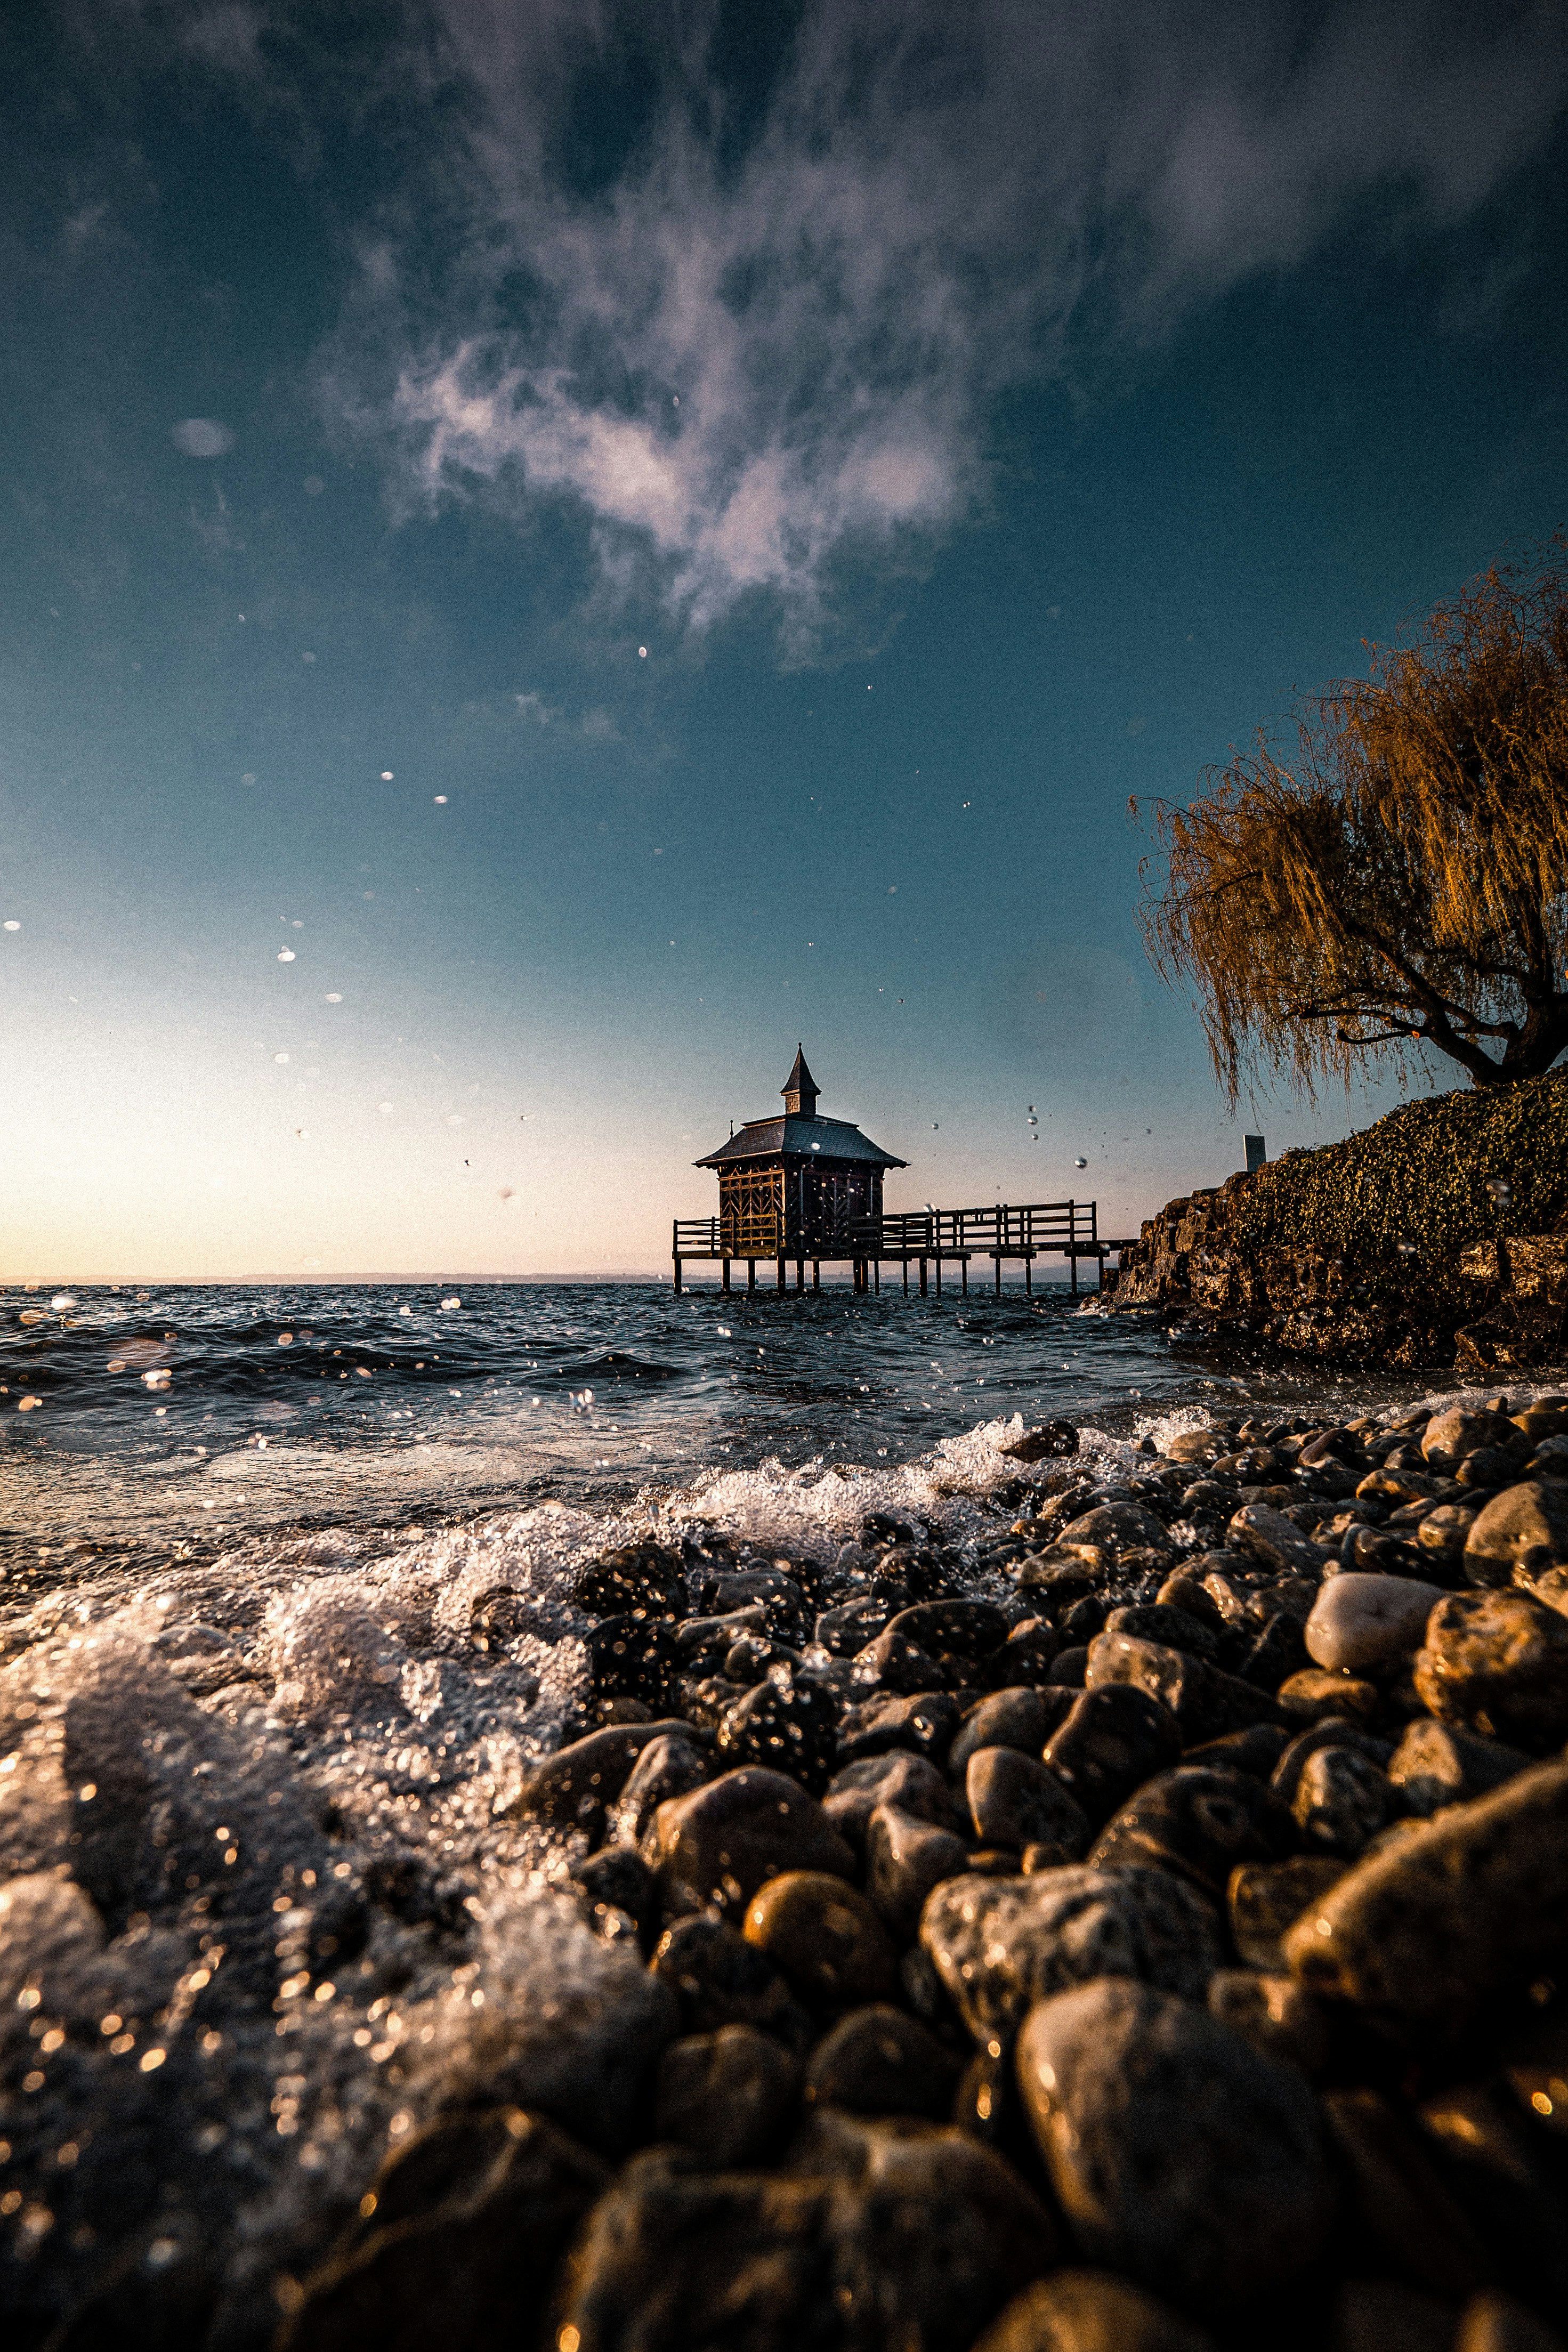 brown wooden house on rocky shore during night time